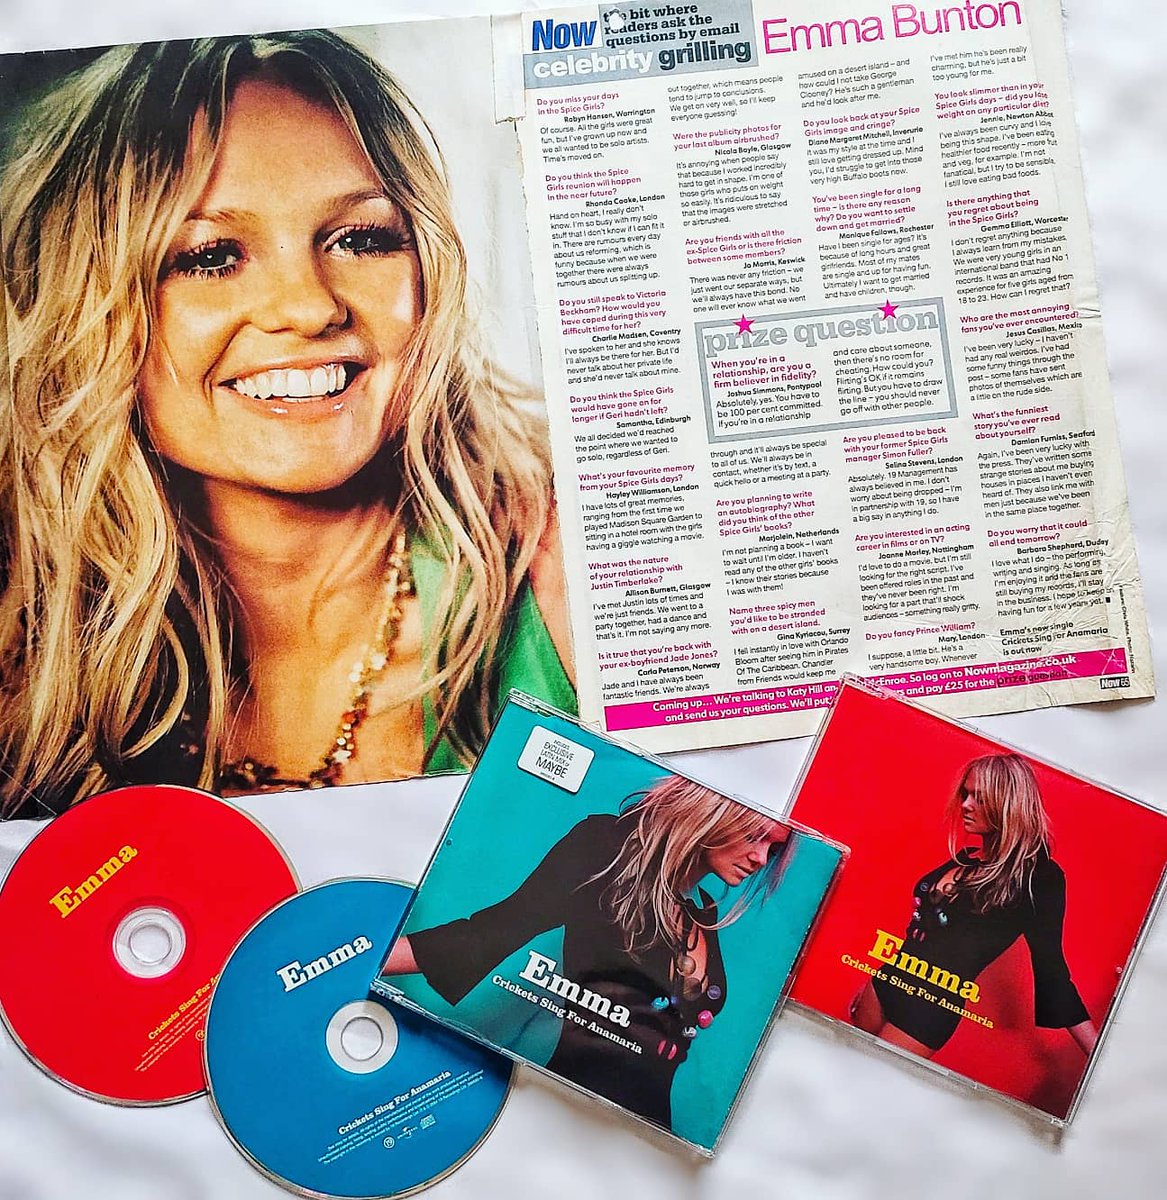 19 years ago @EmmaBunton released Crickets Sing For Anamaria on 31 May, 2004, as the fourth & final single from her second solo album, Free Me. The single debuted and peaked at #15 on the UK singles chart, & was Emma’s second single to miss out on a top-10 entry.